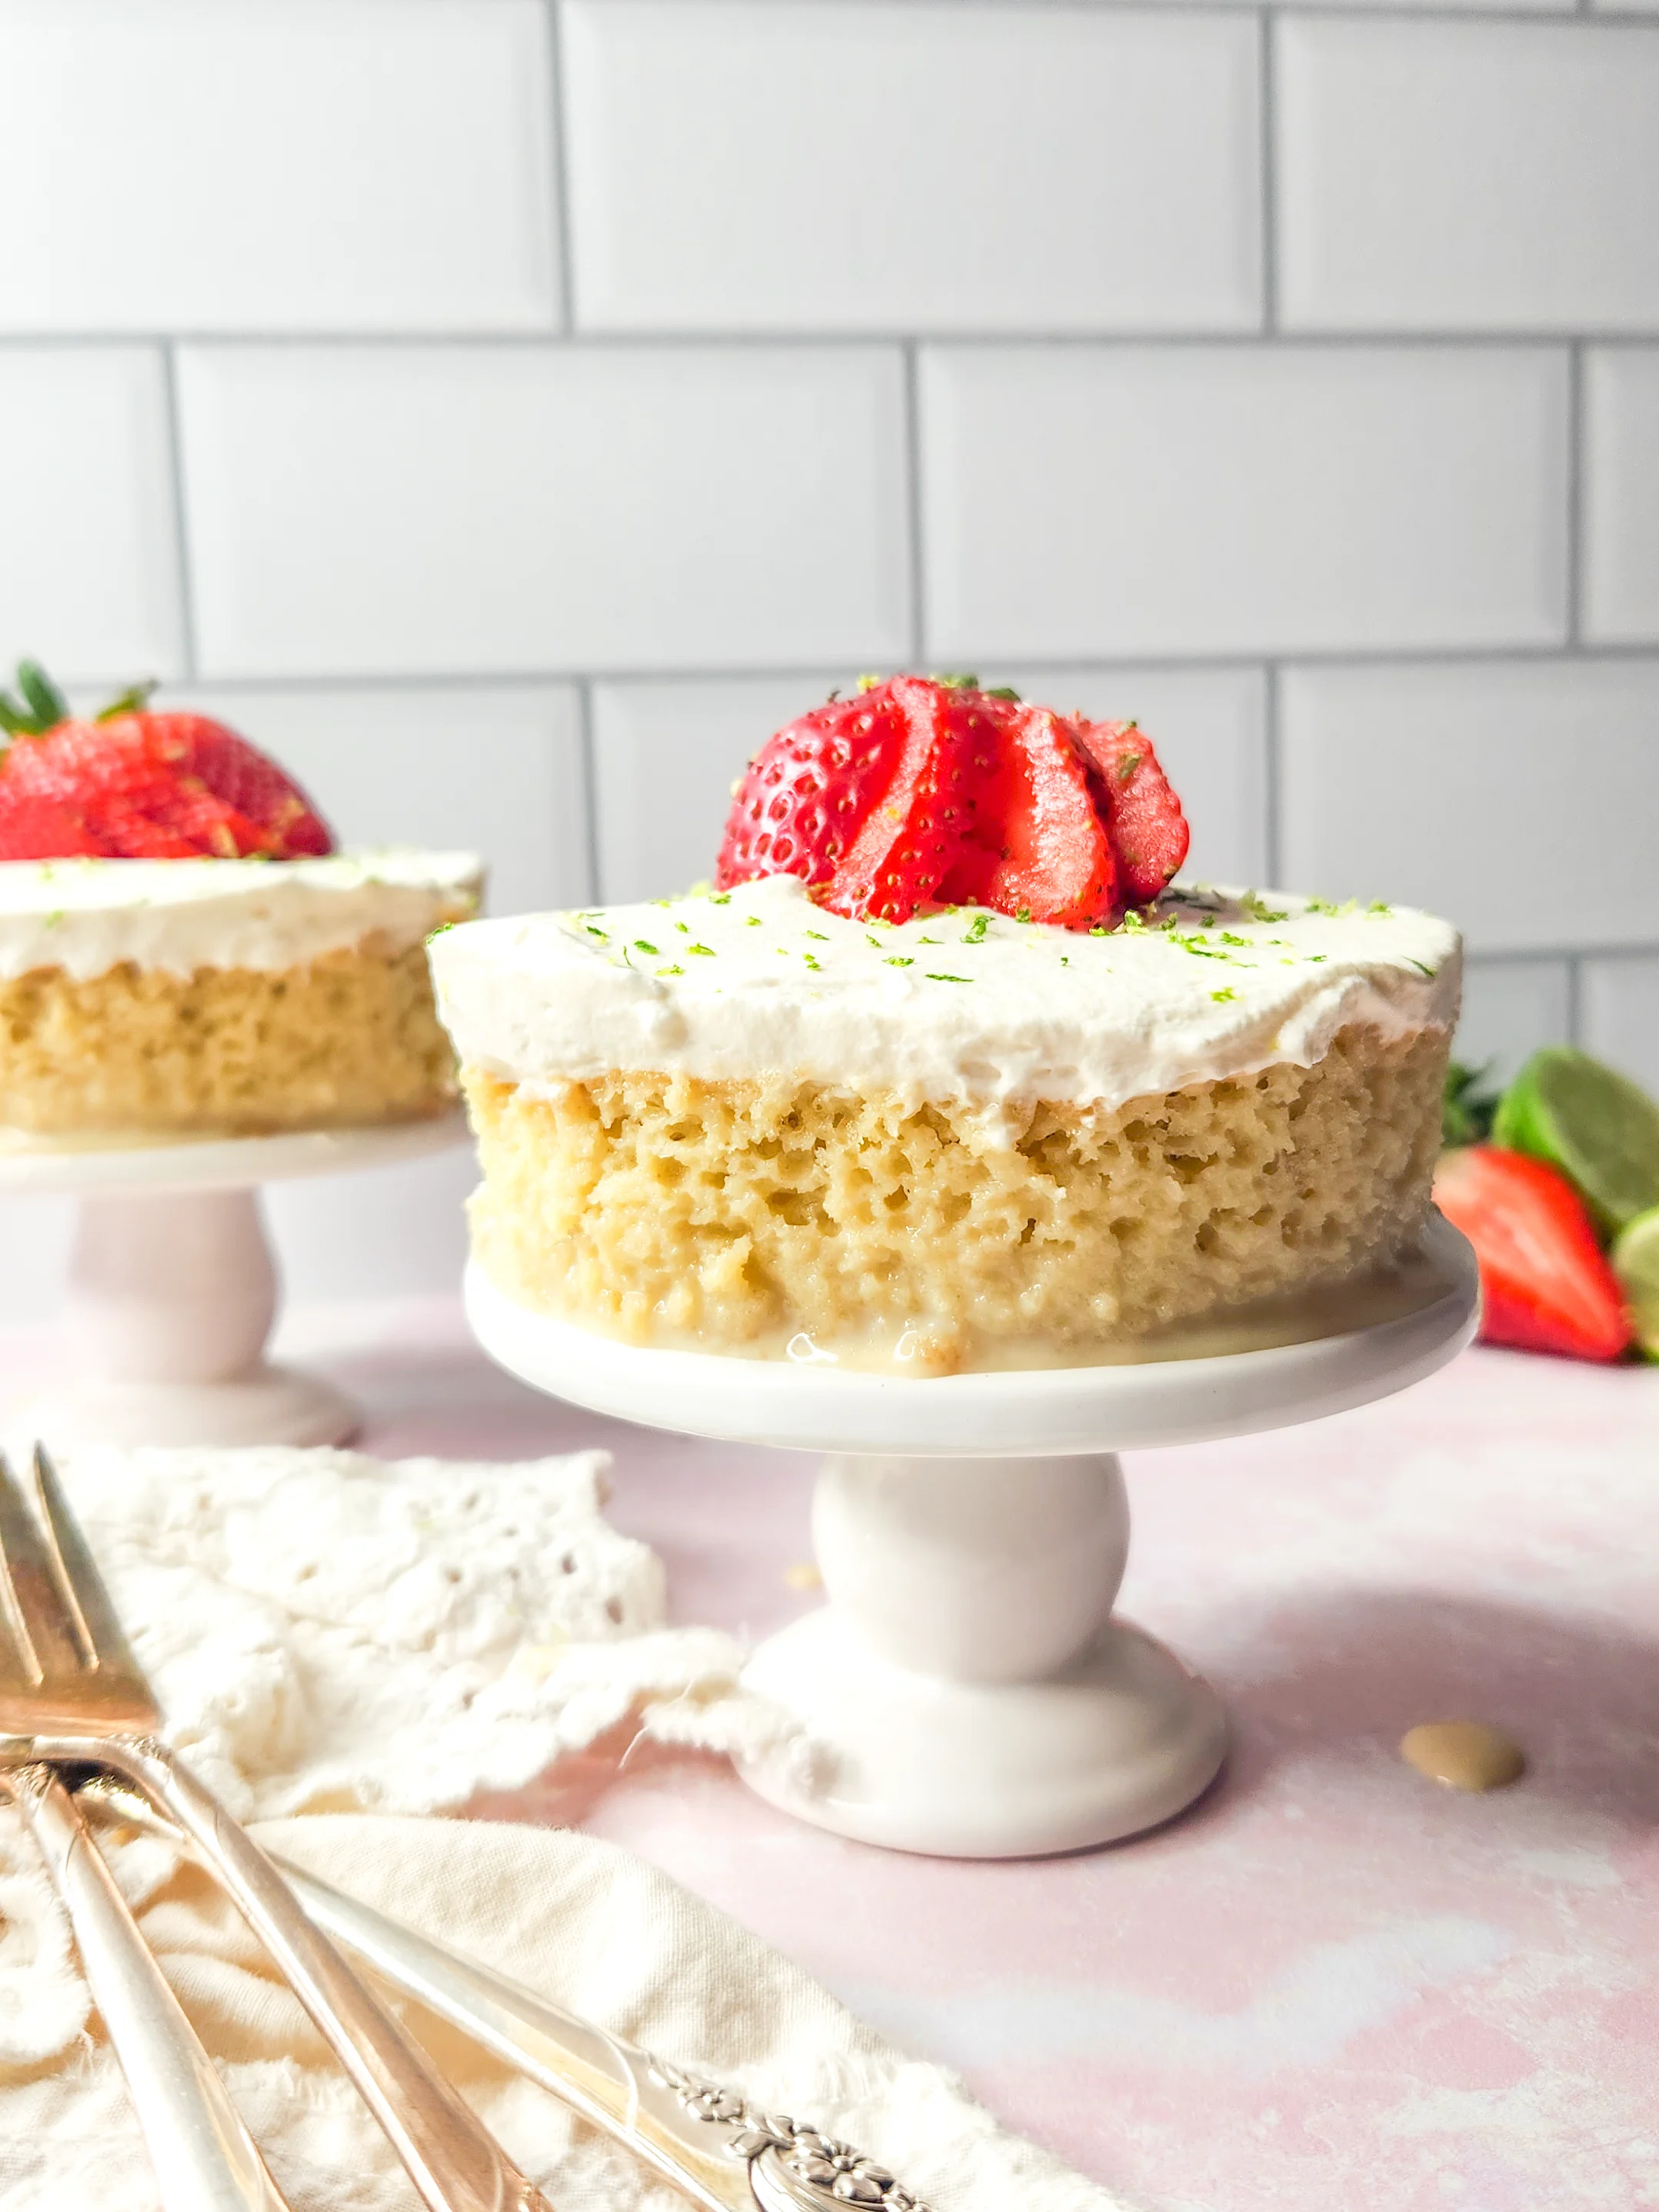 A round cut-out of gluten free tres leches cake sits on a white mini cake stand. It is frosted with whipped cream and topped with sliced strawberries and a sprinkling of lime zest. Another mini cake stand features the same in the background, and additional strawberries and limes can be seen in the background.